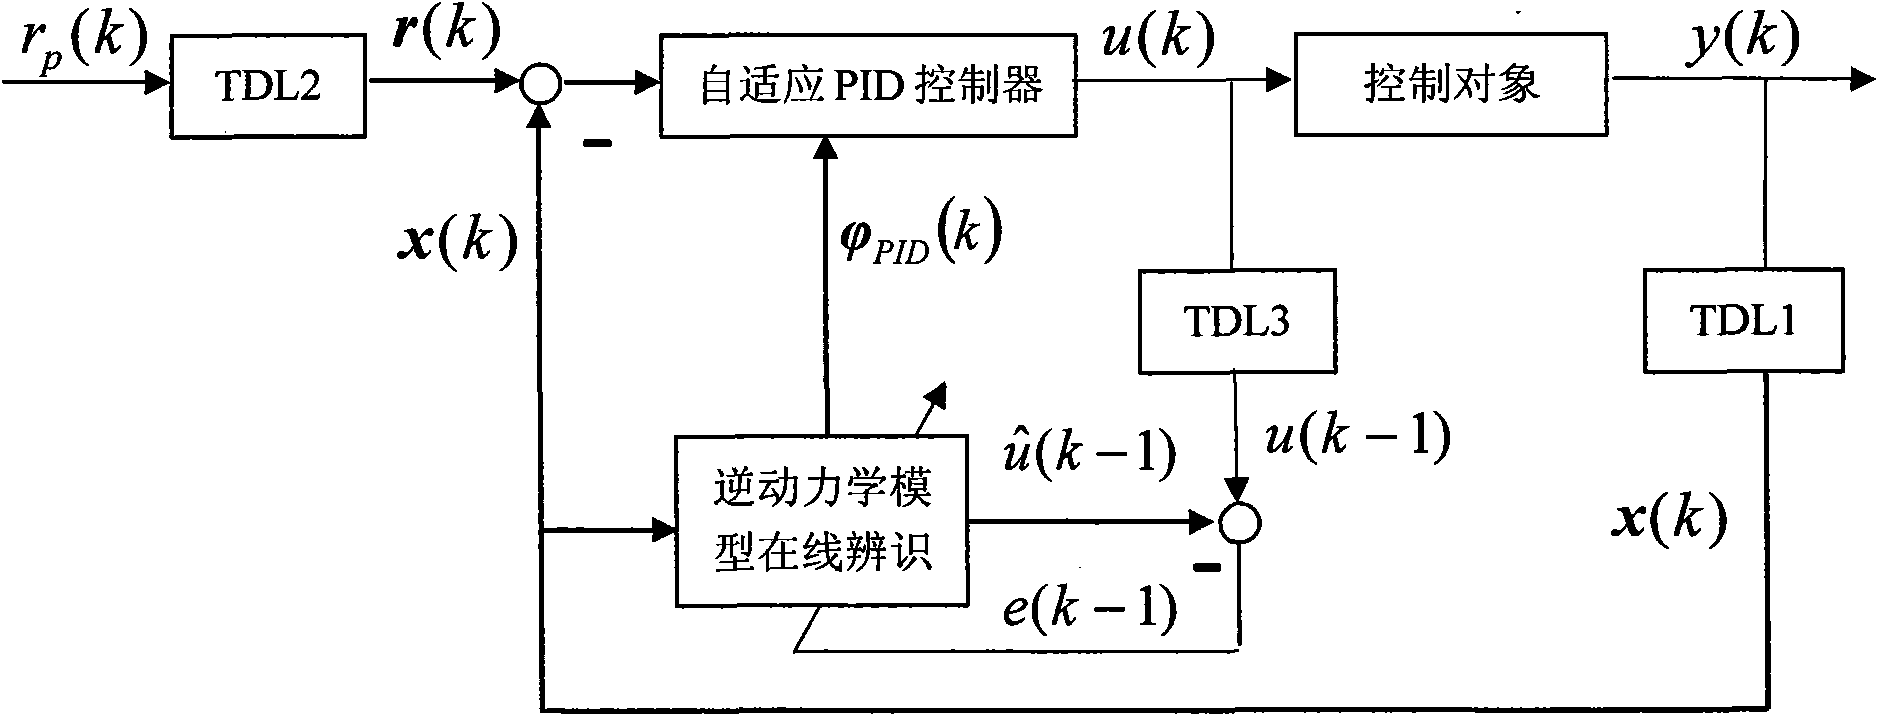 Method for designing self-adaptive PID controller based on inverse dynamics model